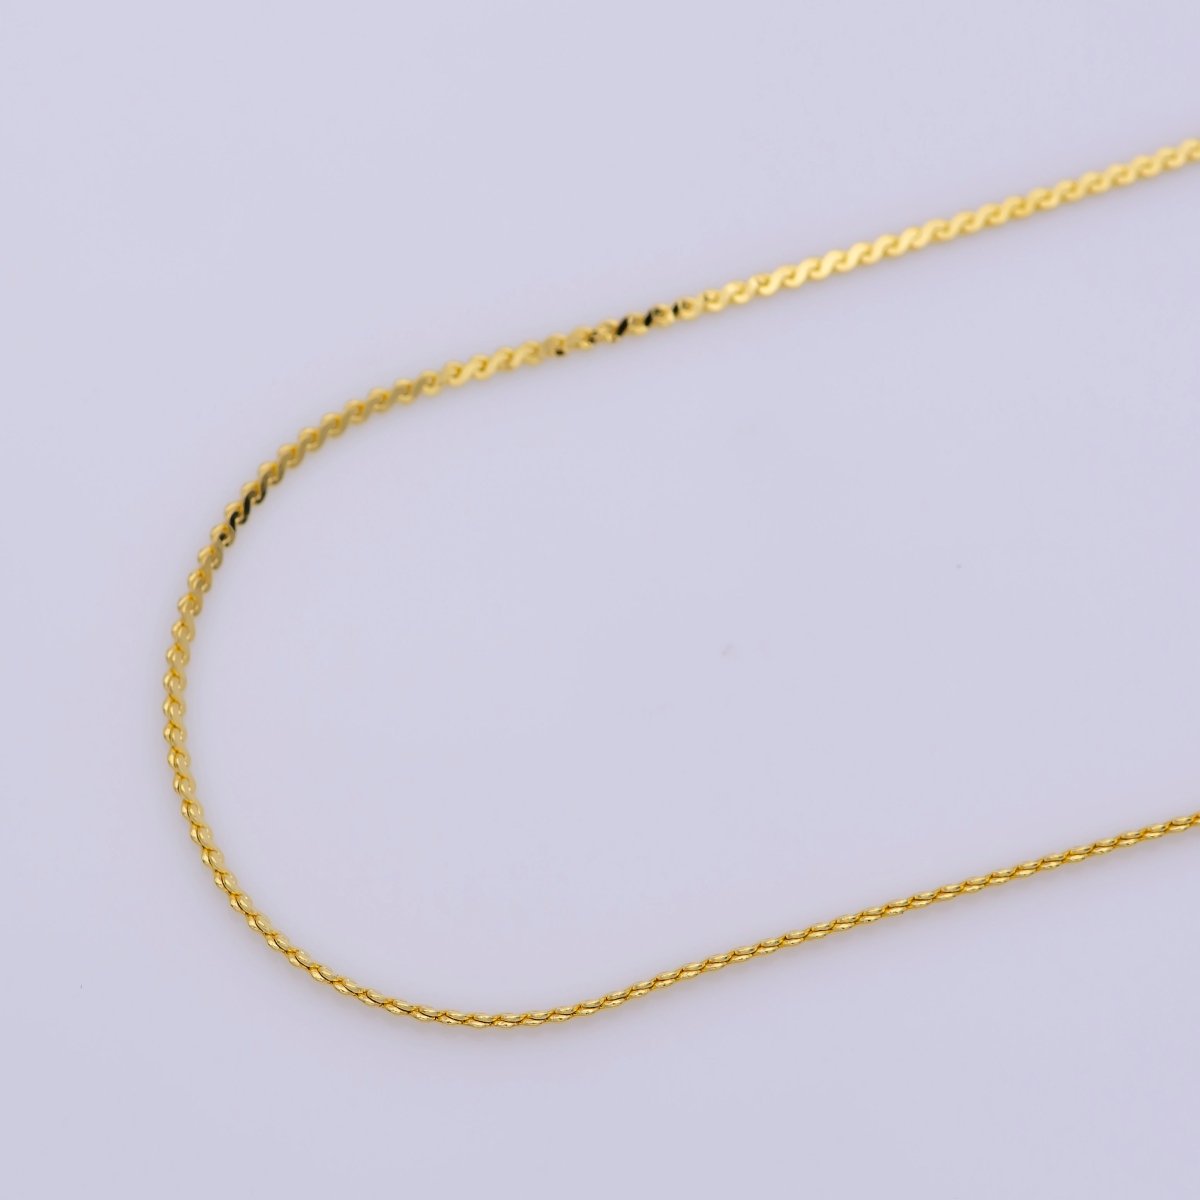 17.5 inch Designed Chain Necklace, 24K Gold Plated Designed Finished Chain For Jewelry Making, Dainty 1.4mm Designed Necklace w/ Spring Ring | CN-363 Clearance Pricing - DLUXCA